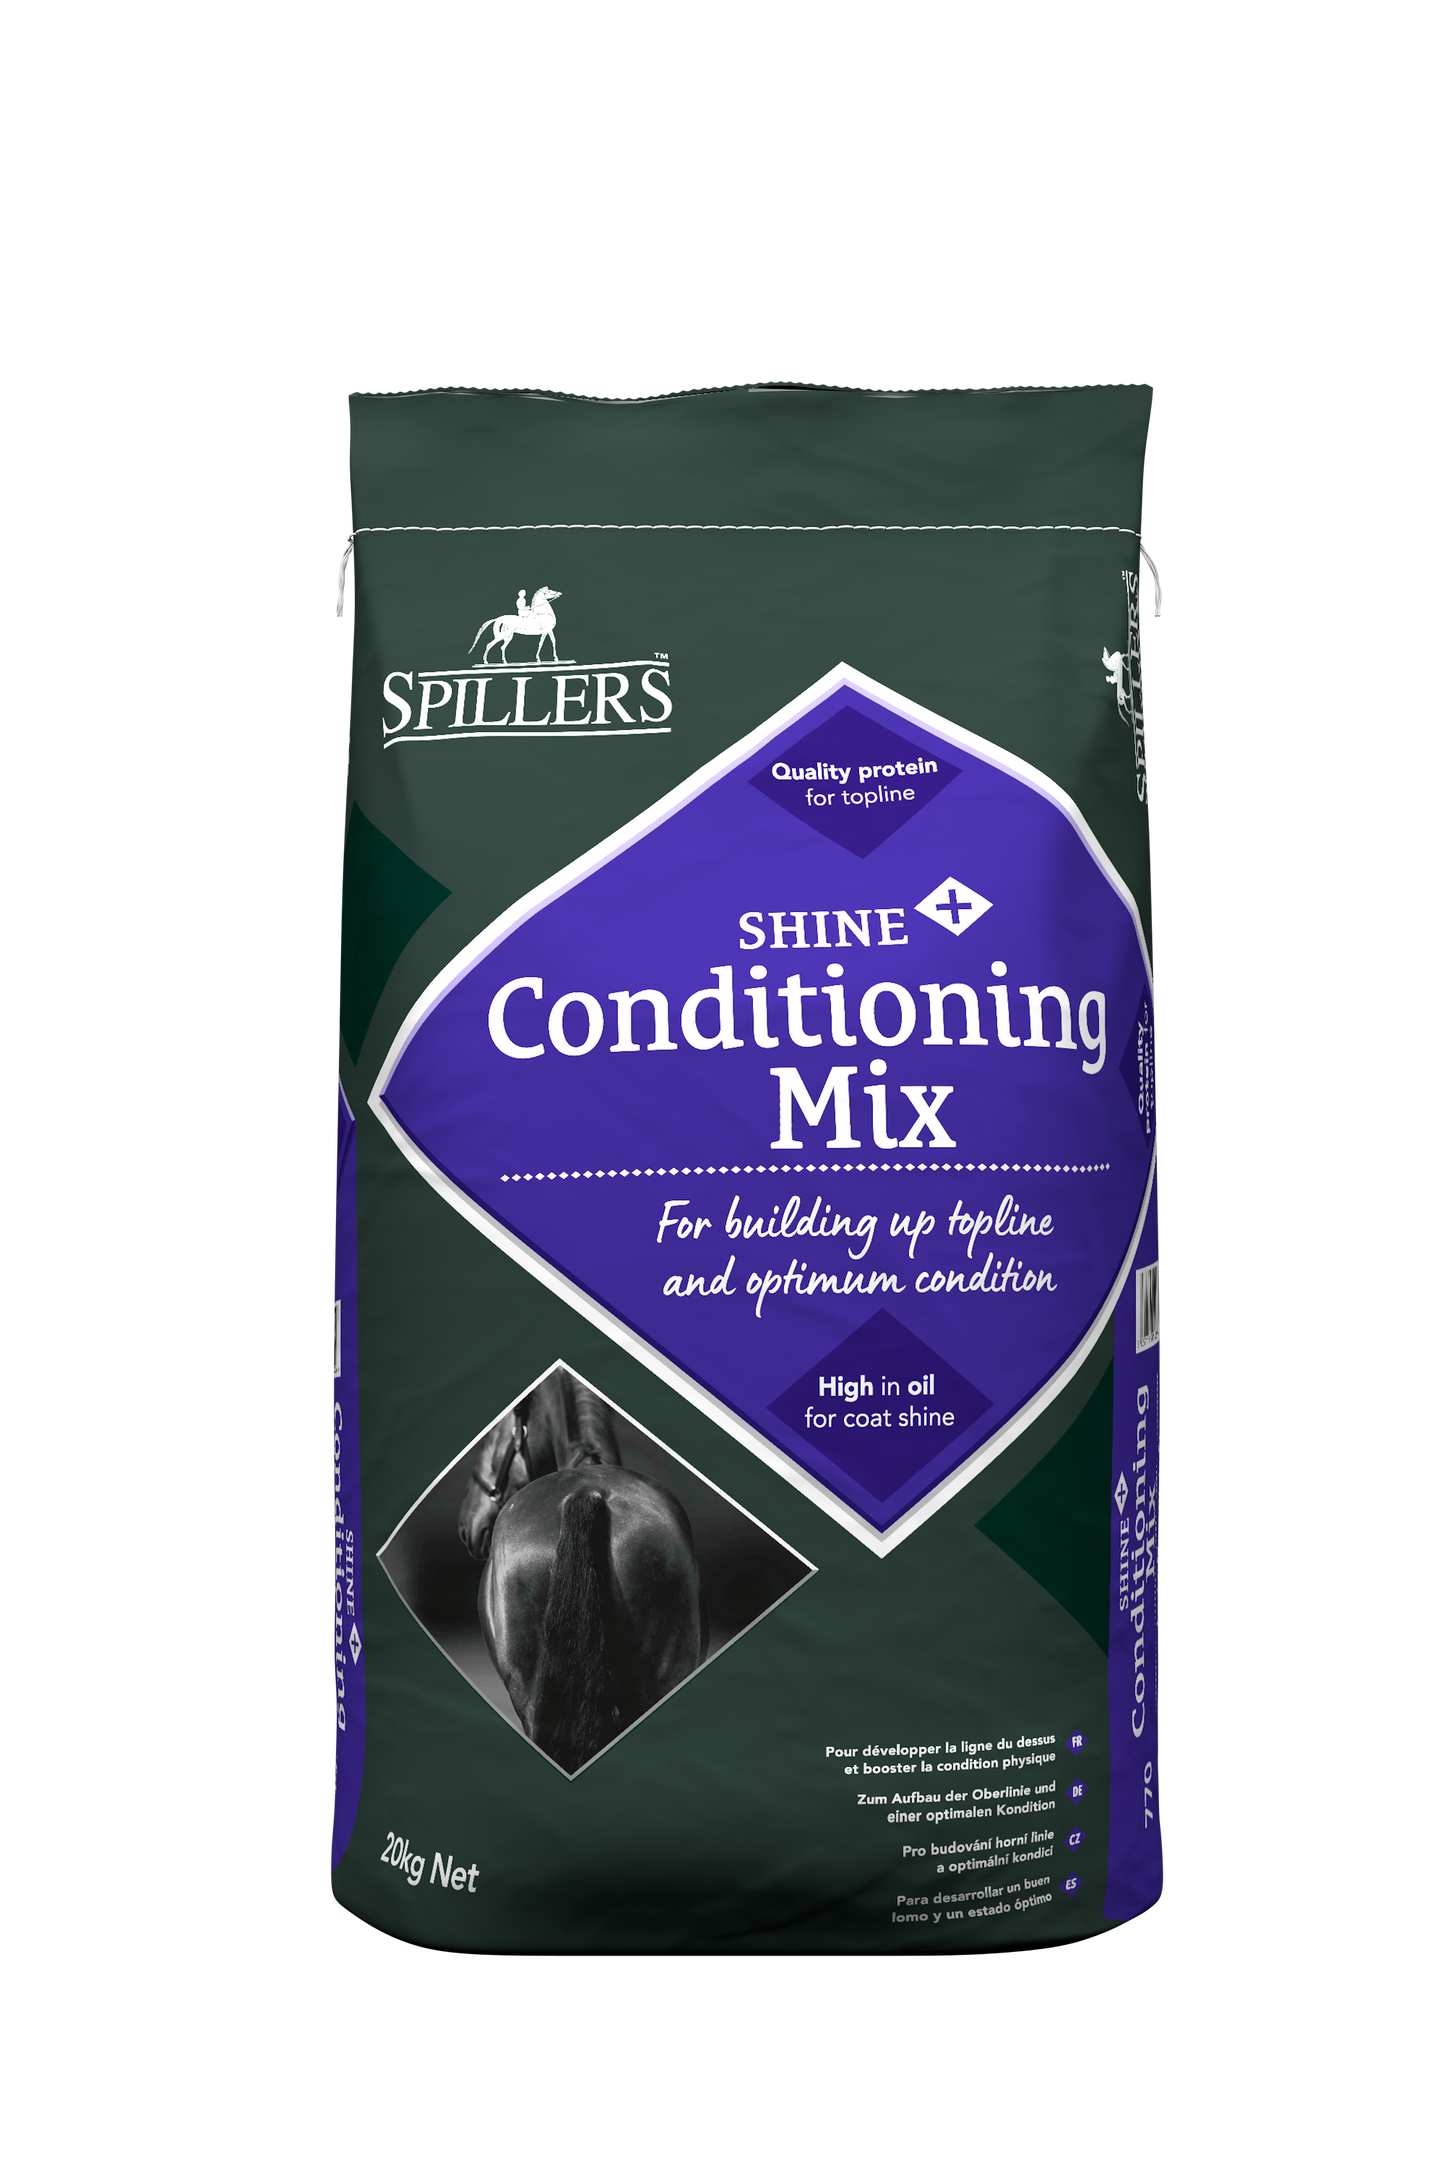 Spillers Shine + Conditioning Mix